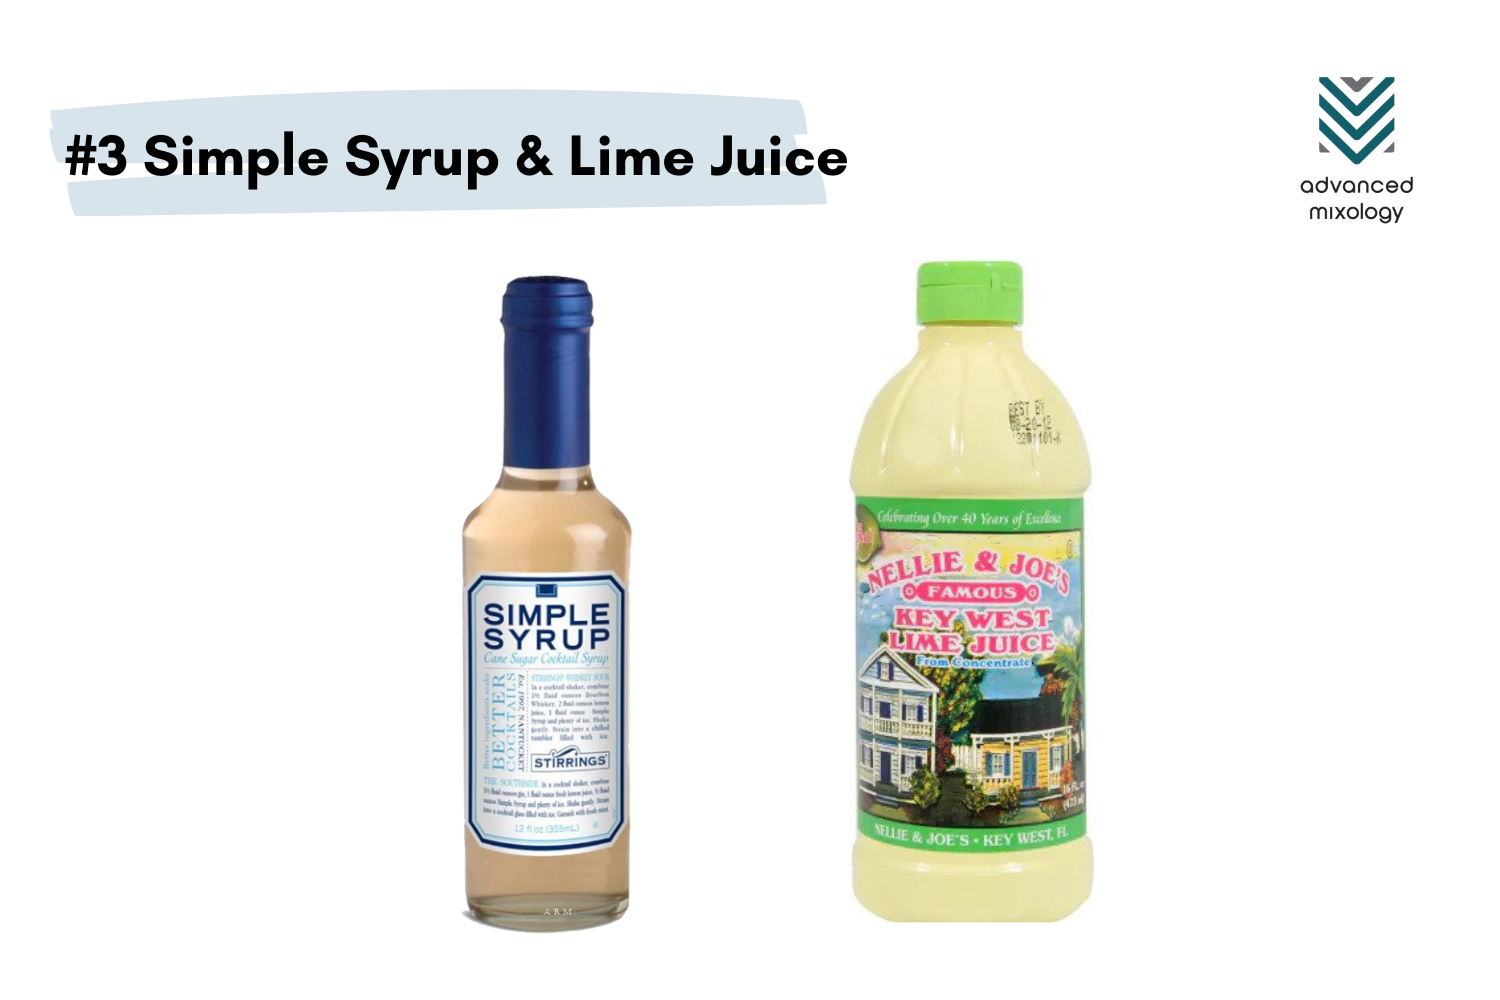 Simple Syrup and Lime Juice